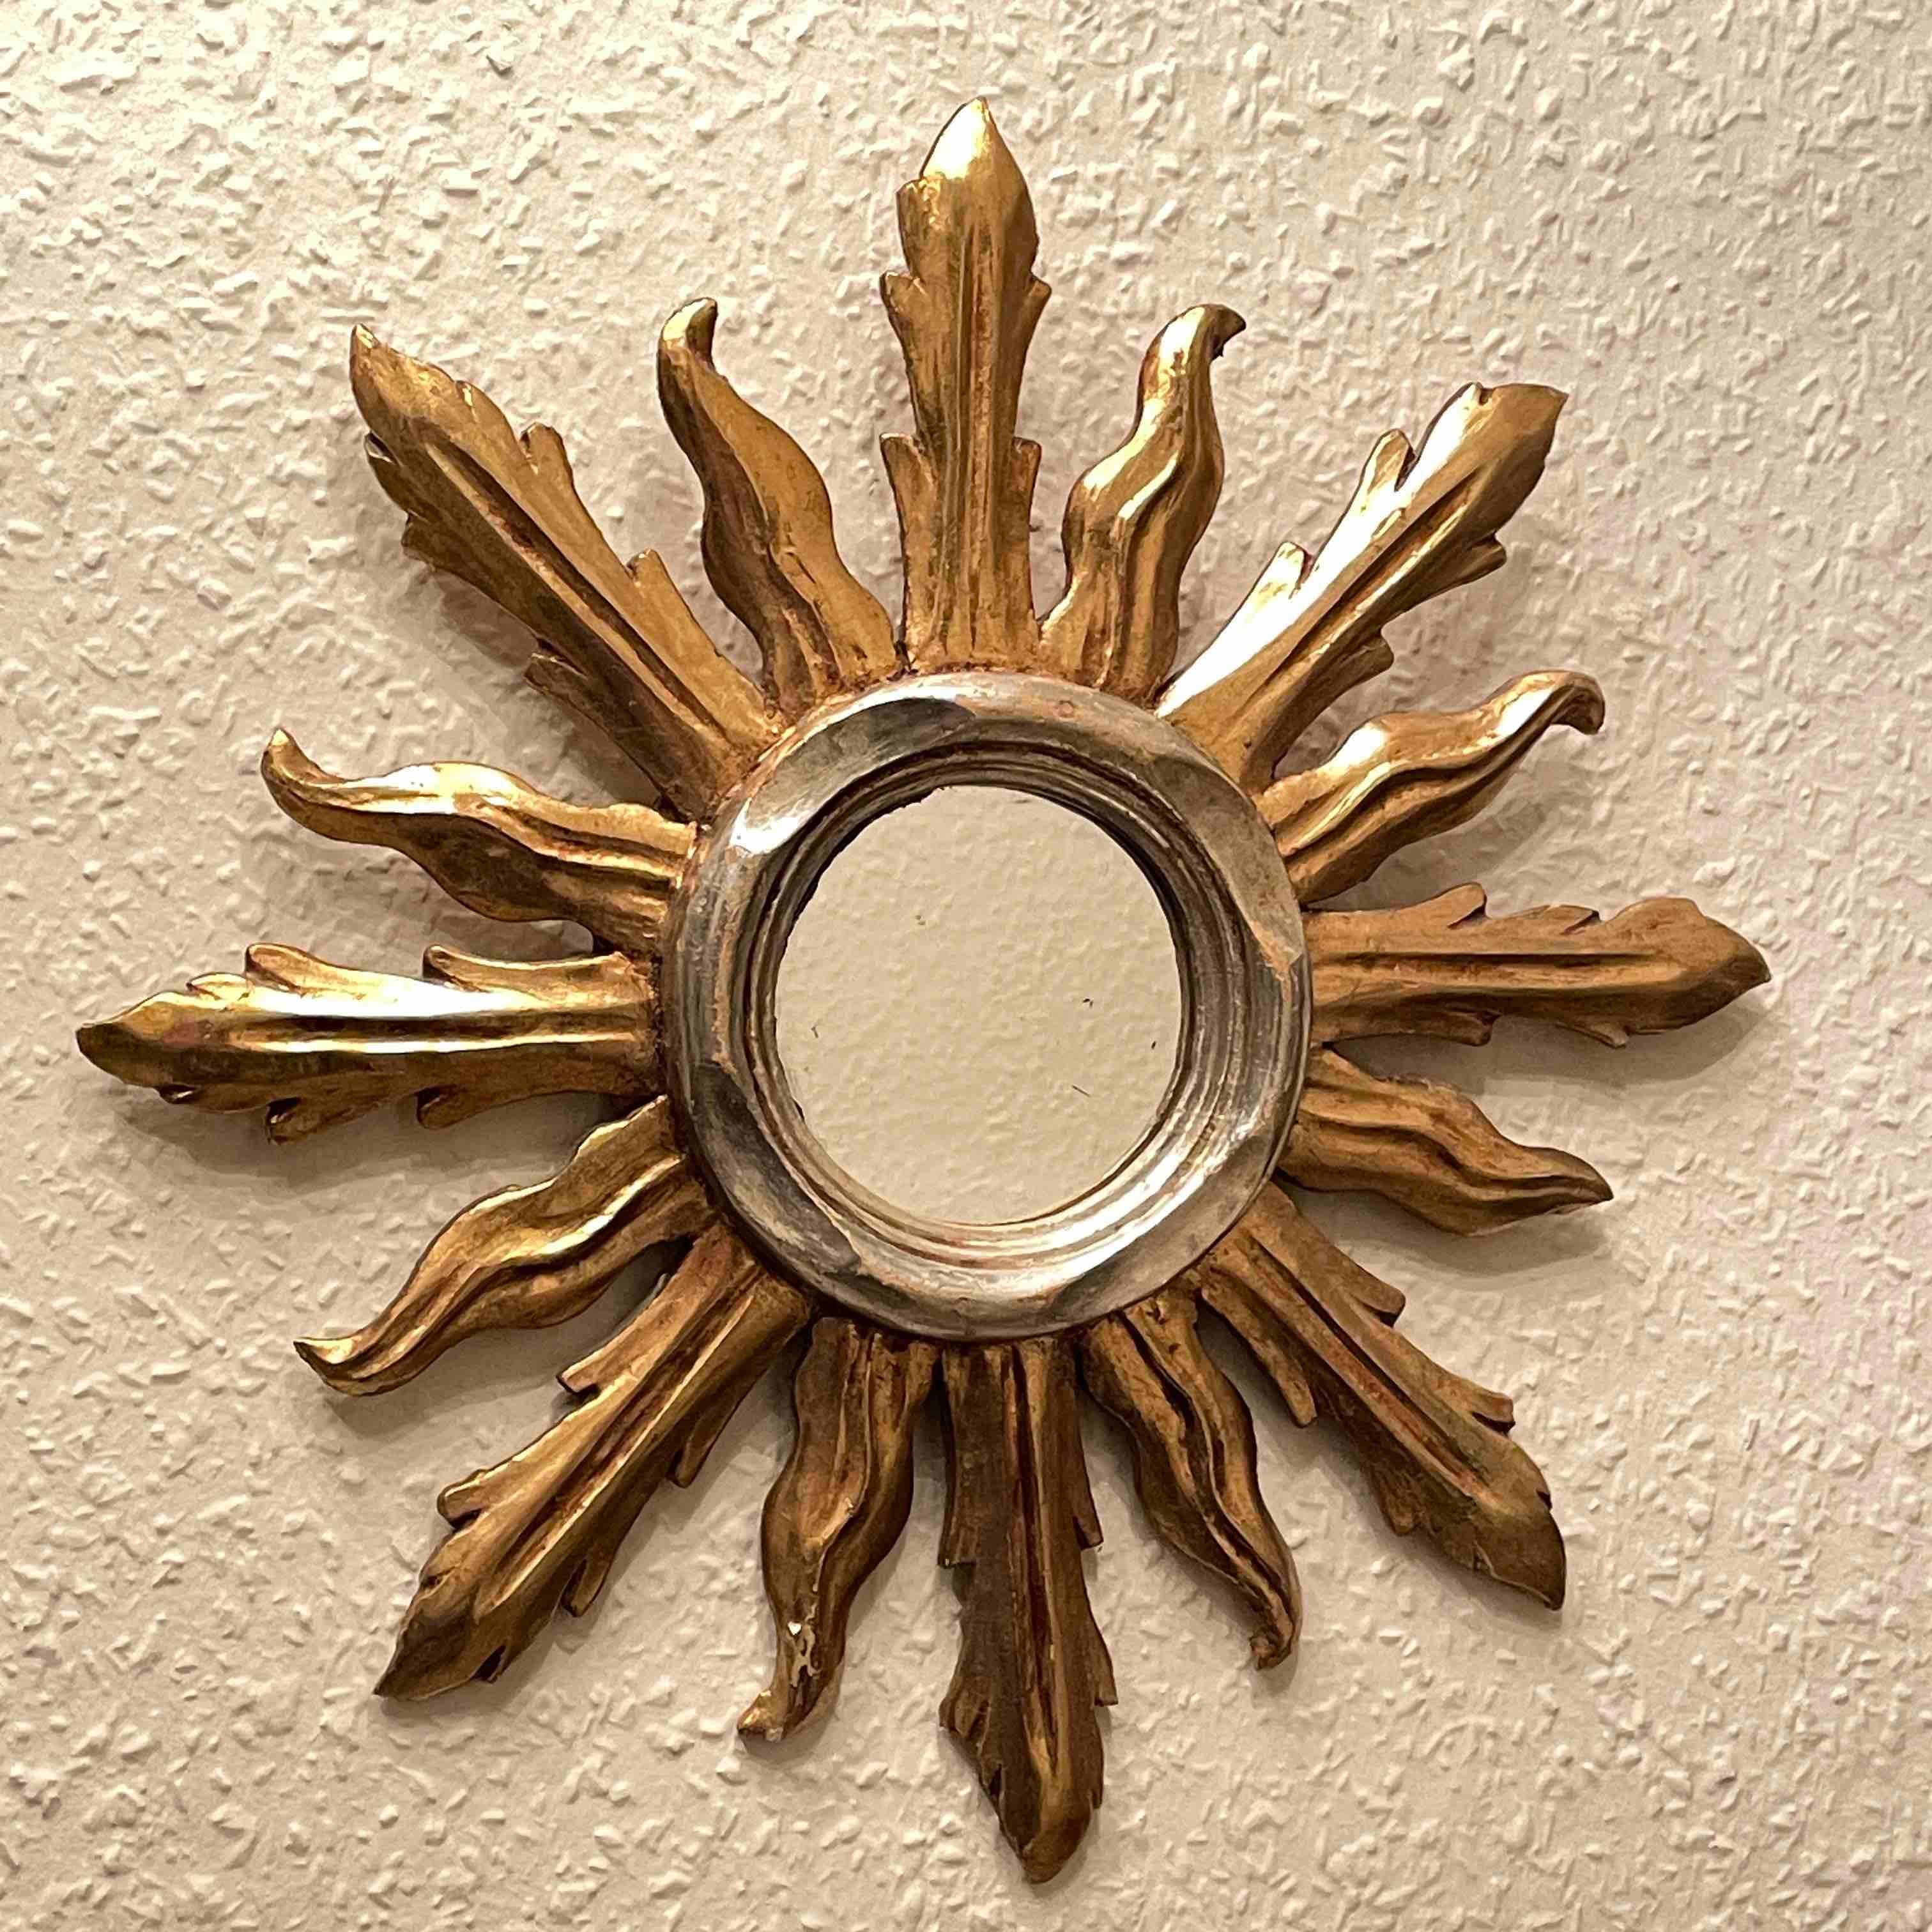 A gorgeous petite starburst mirror. Made of gilded and silvered wood. No chips, no cracks, no repairs. It measures approximate: 13.13